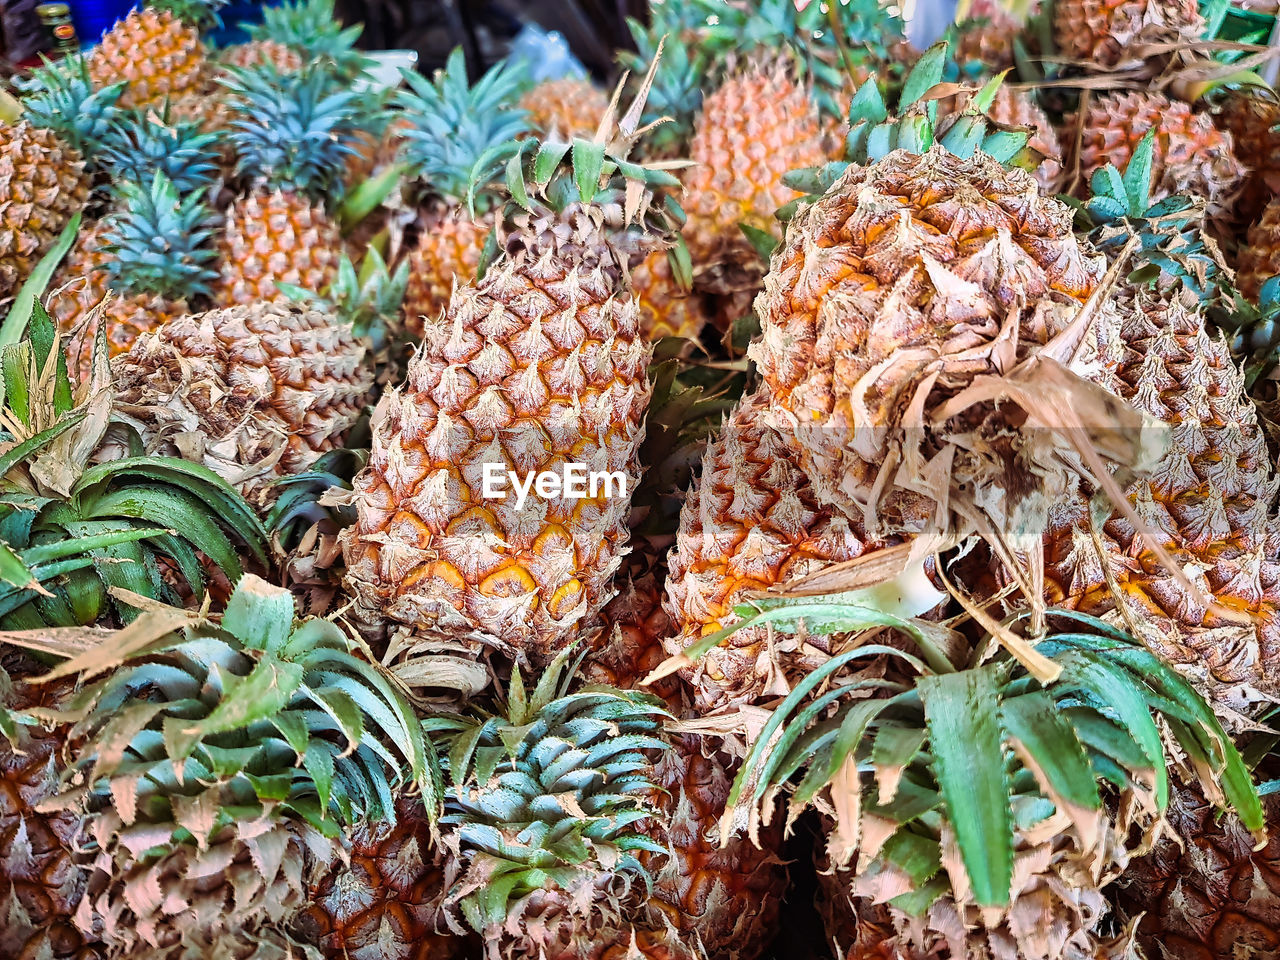 pineapple, ananas, no people, food and drink, plant, food, day, freshness, nature, high angle view, retail, conifer cone, abundance, market, produce, growth, for sale, leaf, tree, large group of objects, flower, outdoors, healthy eating, wellbeing, plant part, fruit, green, close-up, date palm, full frame